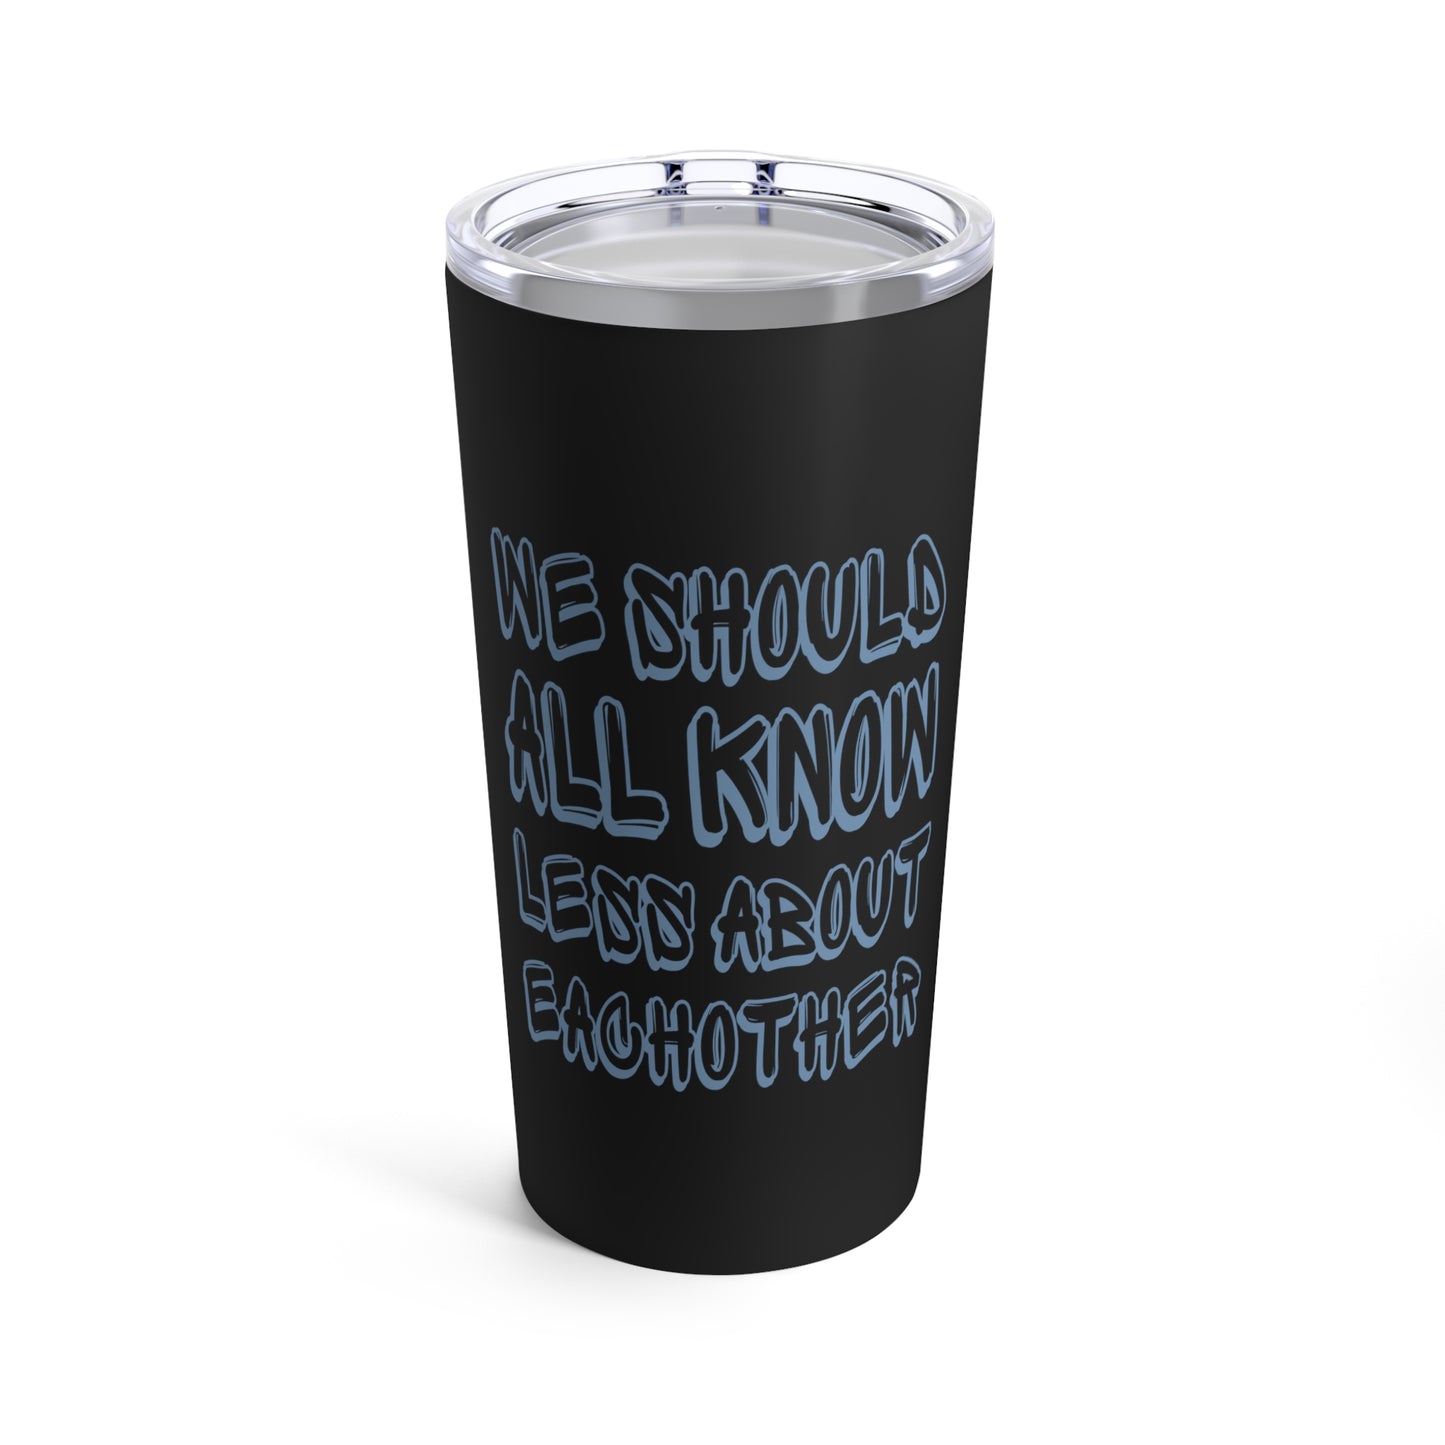 We Should All Know Less About Eachother Tumbler 20oz Beverage Container